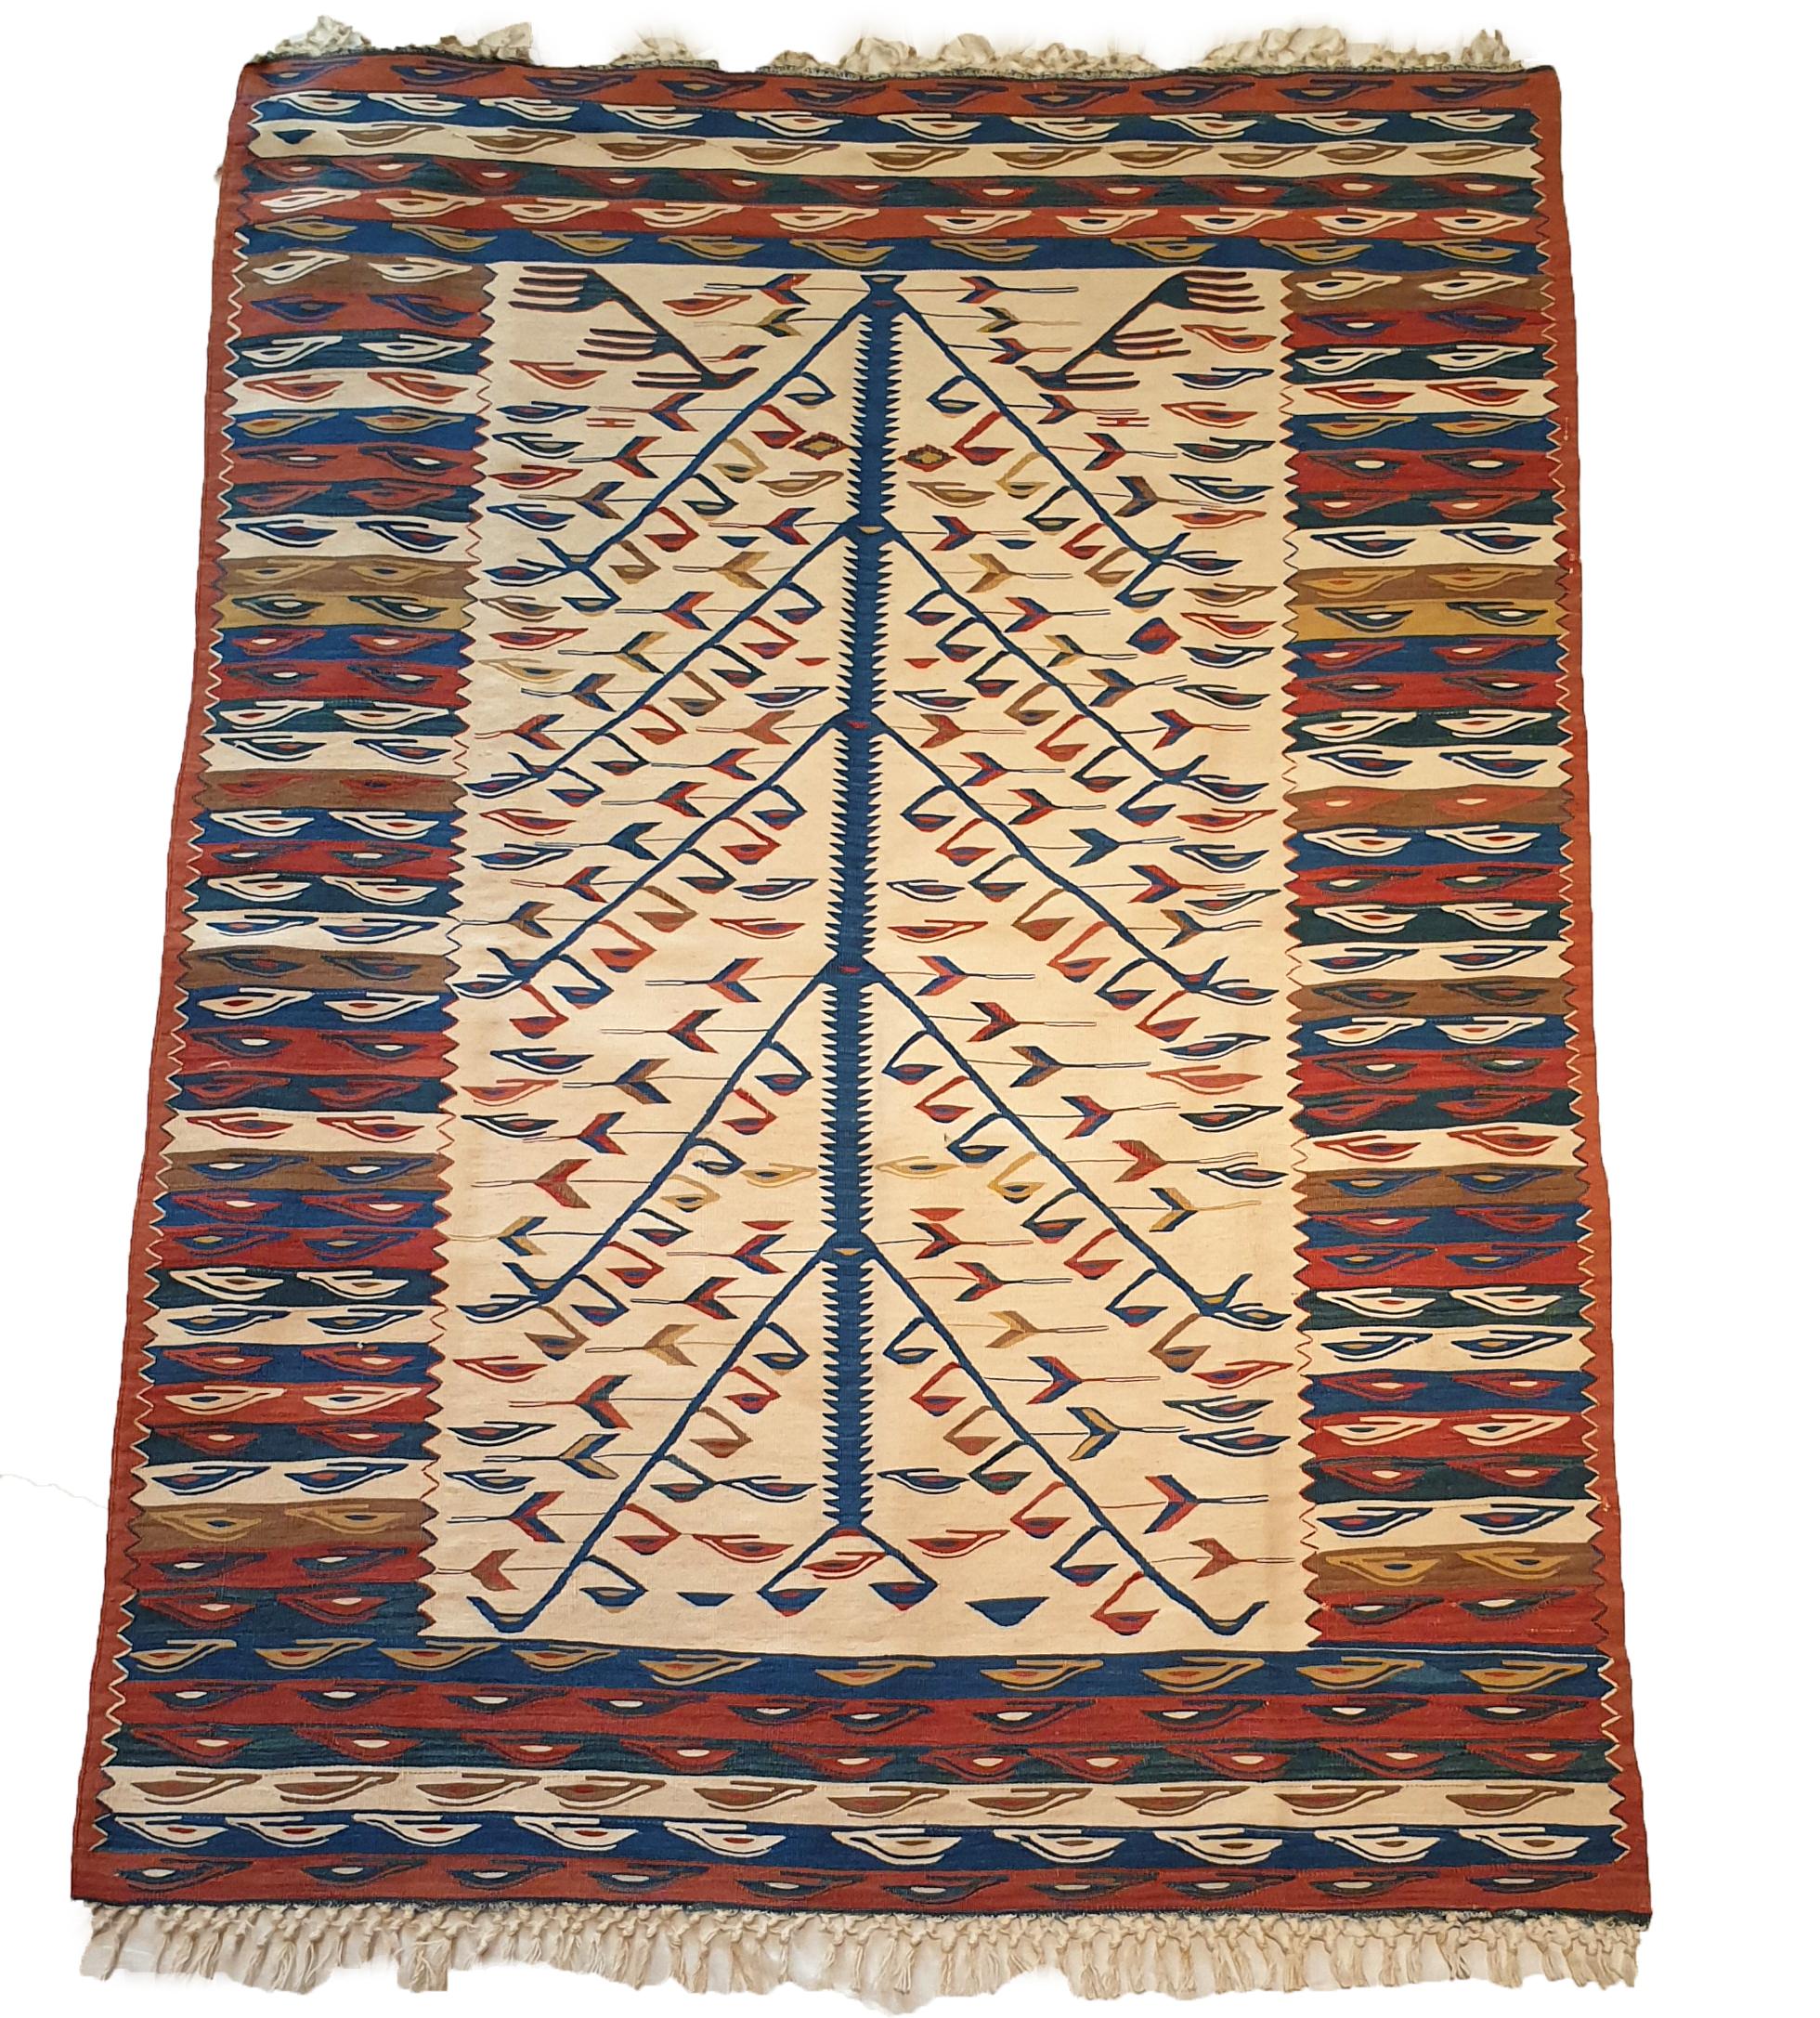 828 - very nice Kilim from the middle of the 20th century with a nice pattern and beautiful colors with red, blue, yellow, and green, entirely handwoven with wool on cotton.